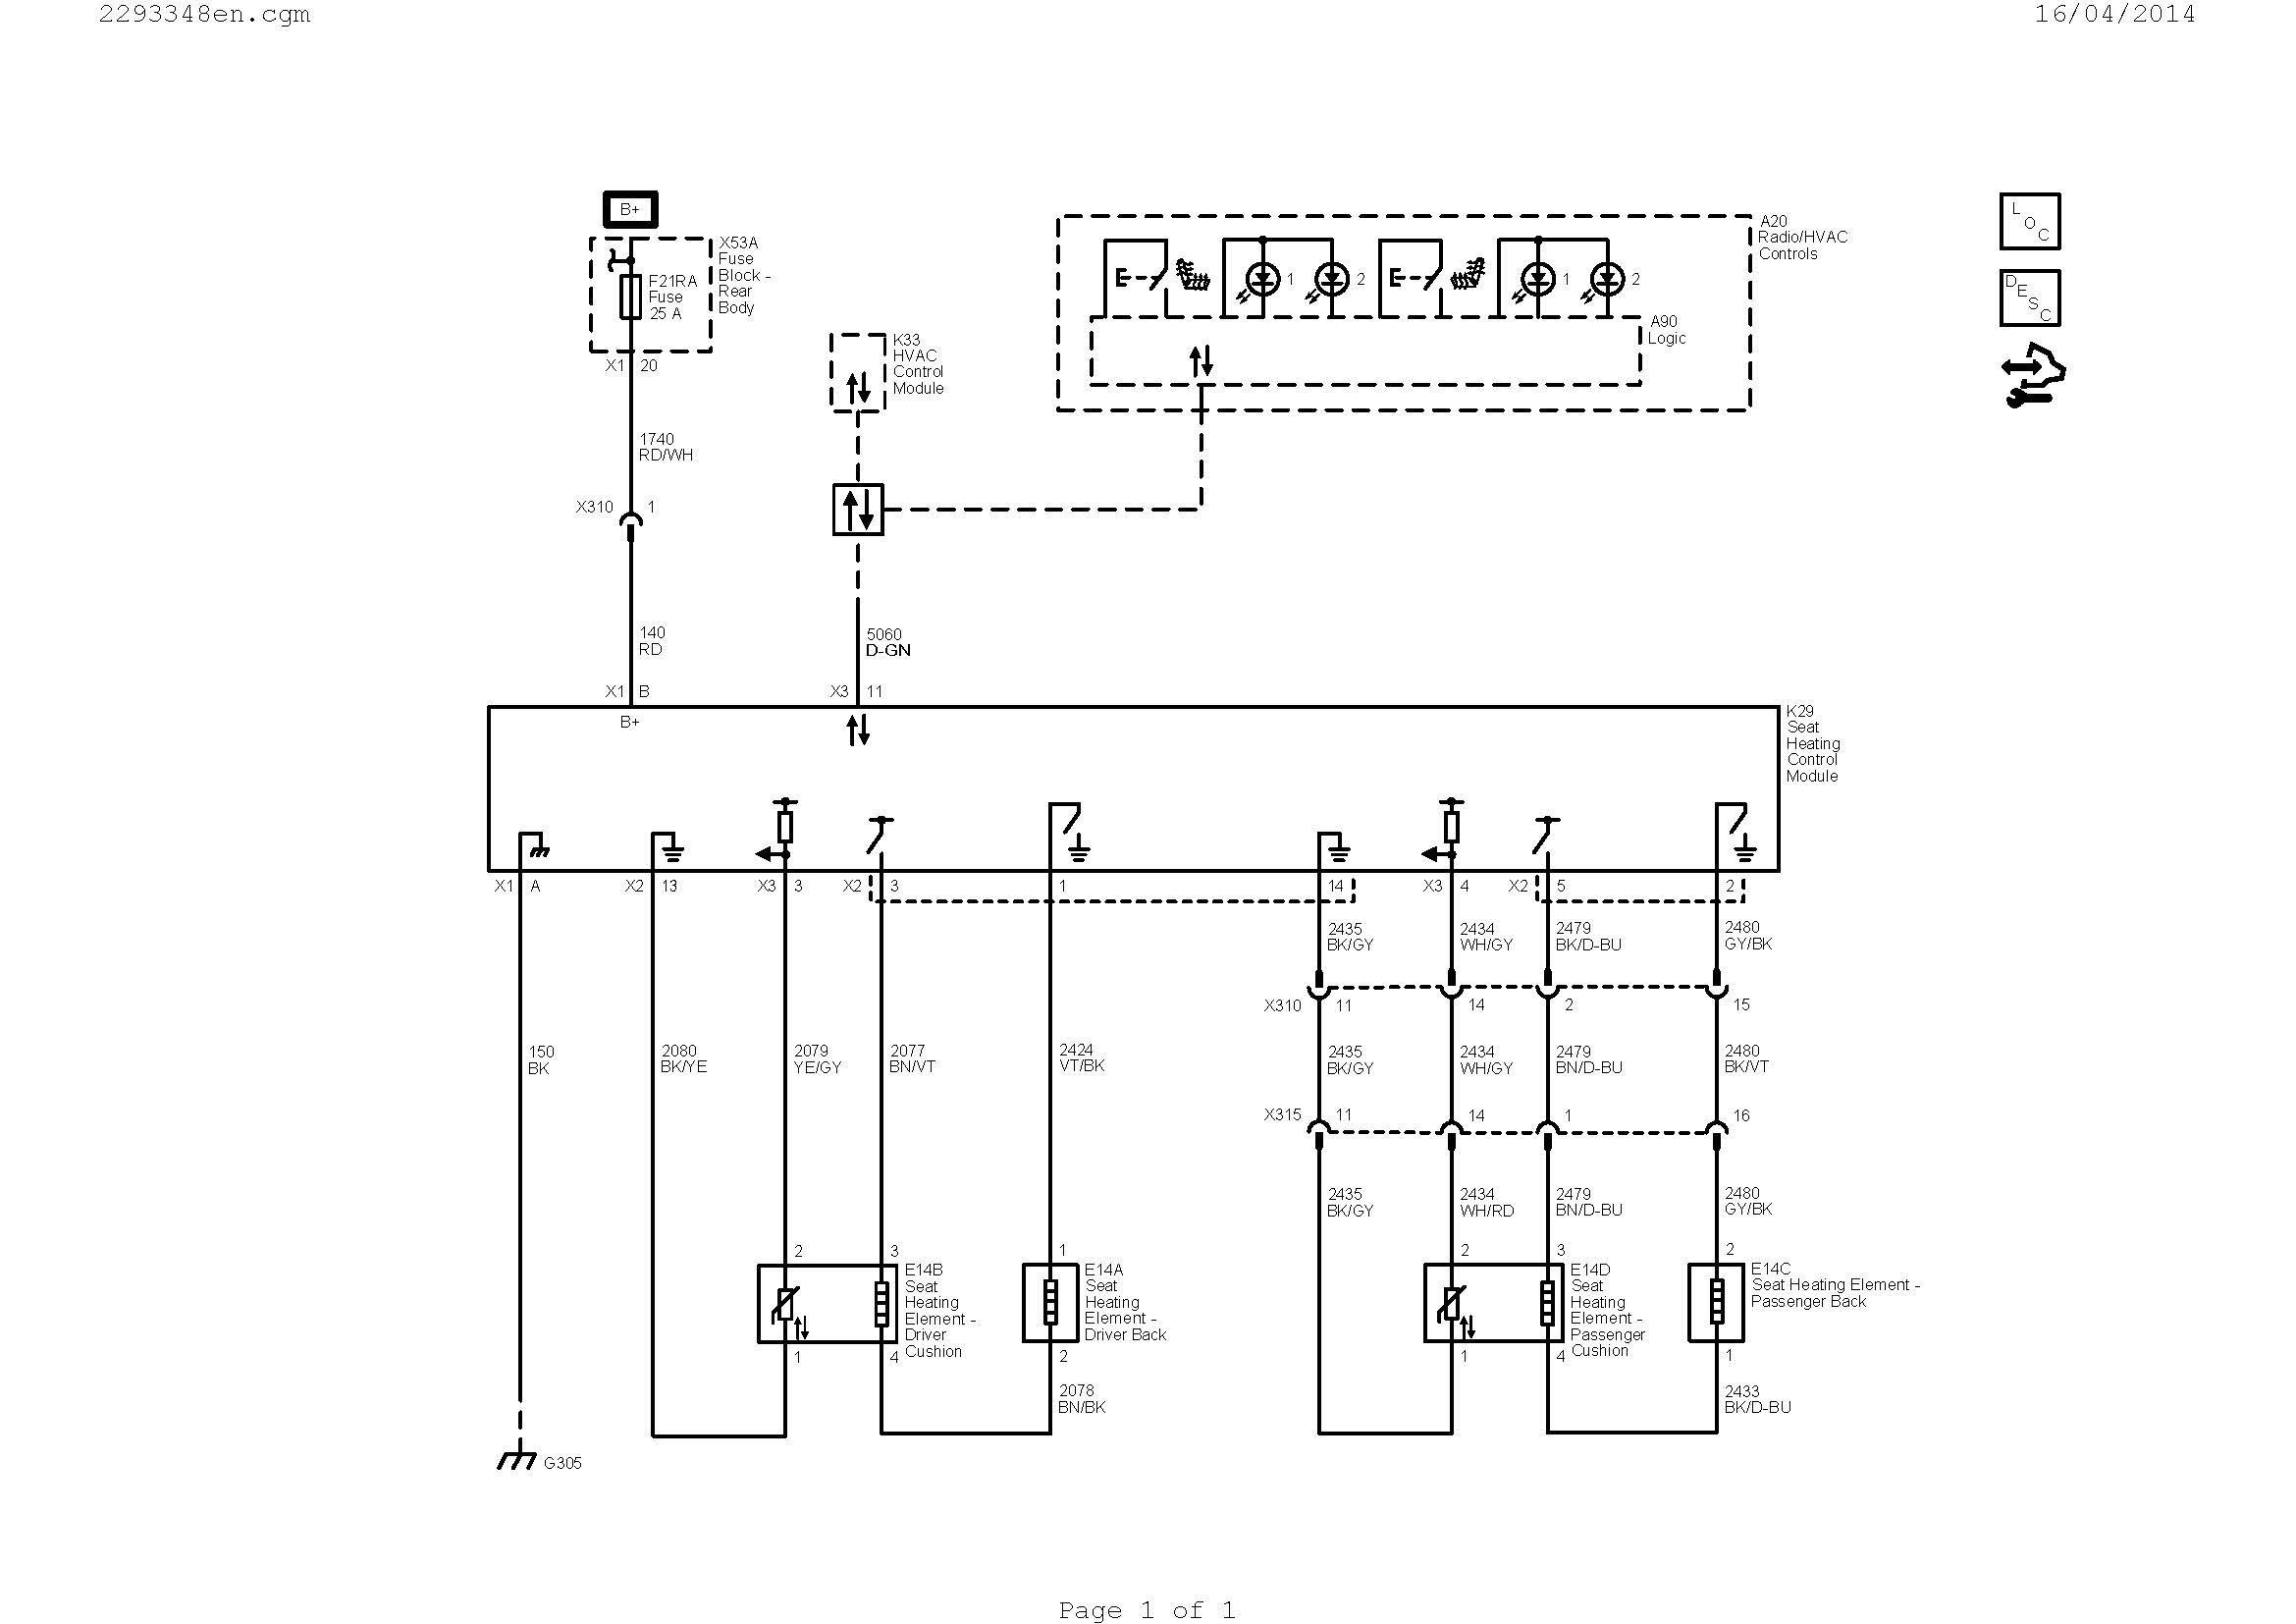 Wiring Diagram for Garage Best Cable Diagram Image